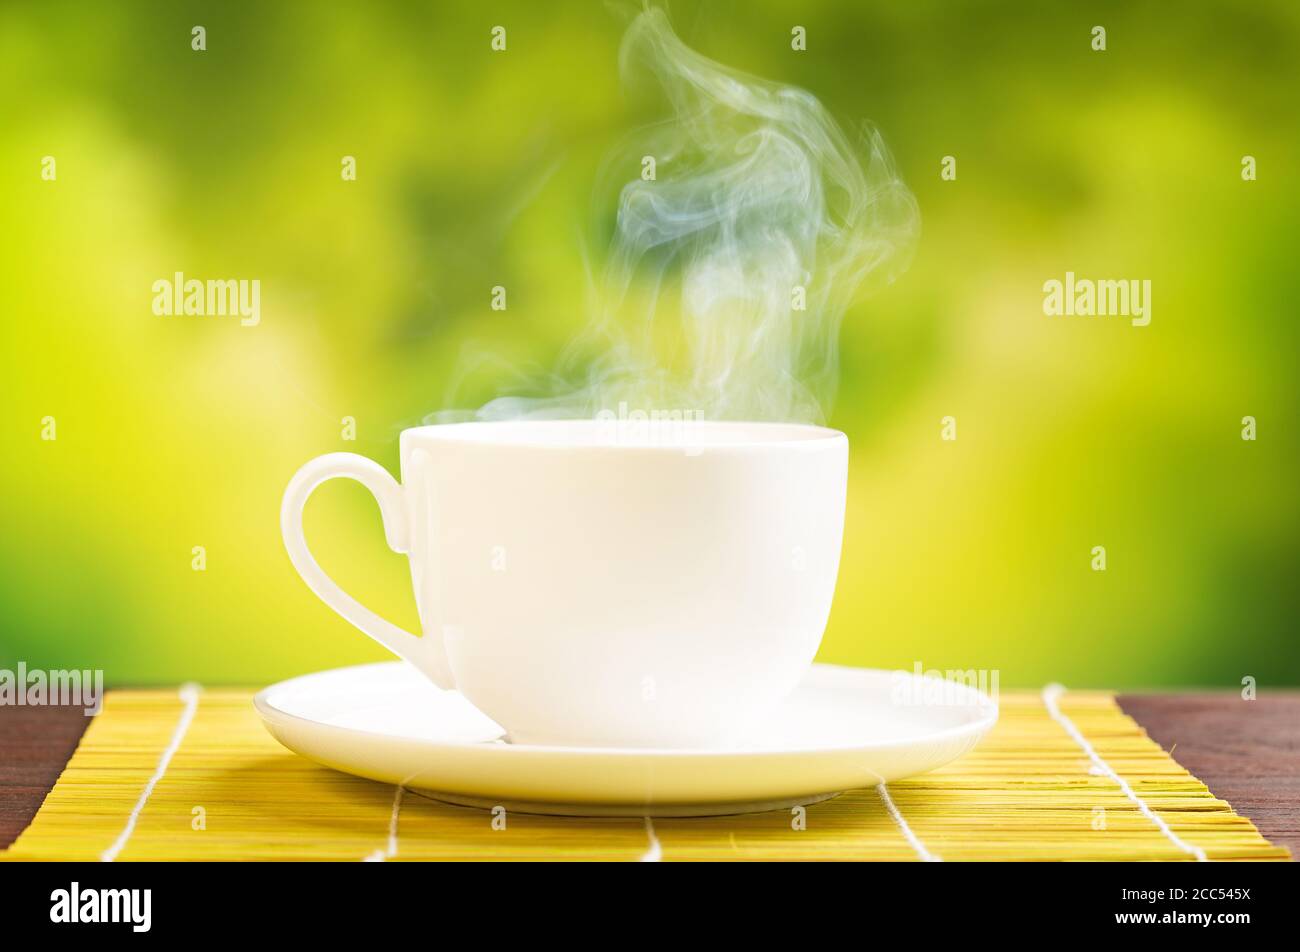 steaming hot drink in blurred green background Stock Photo